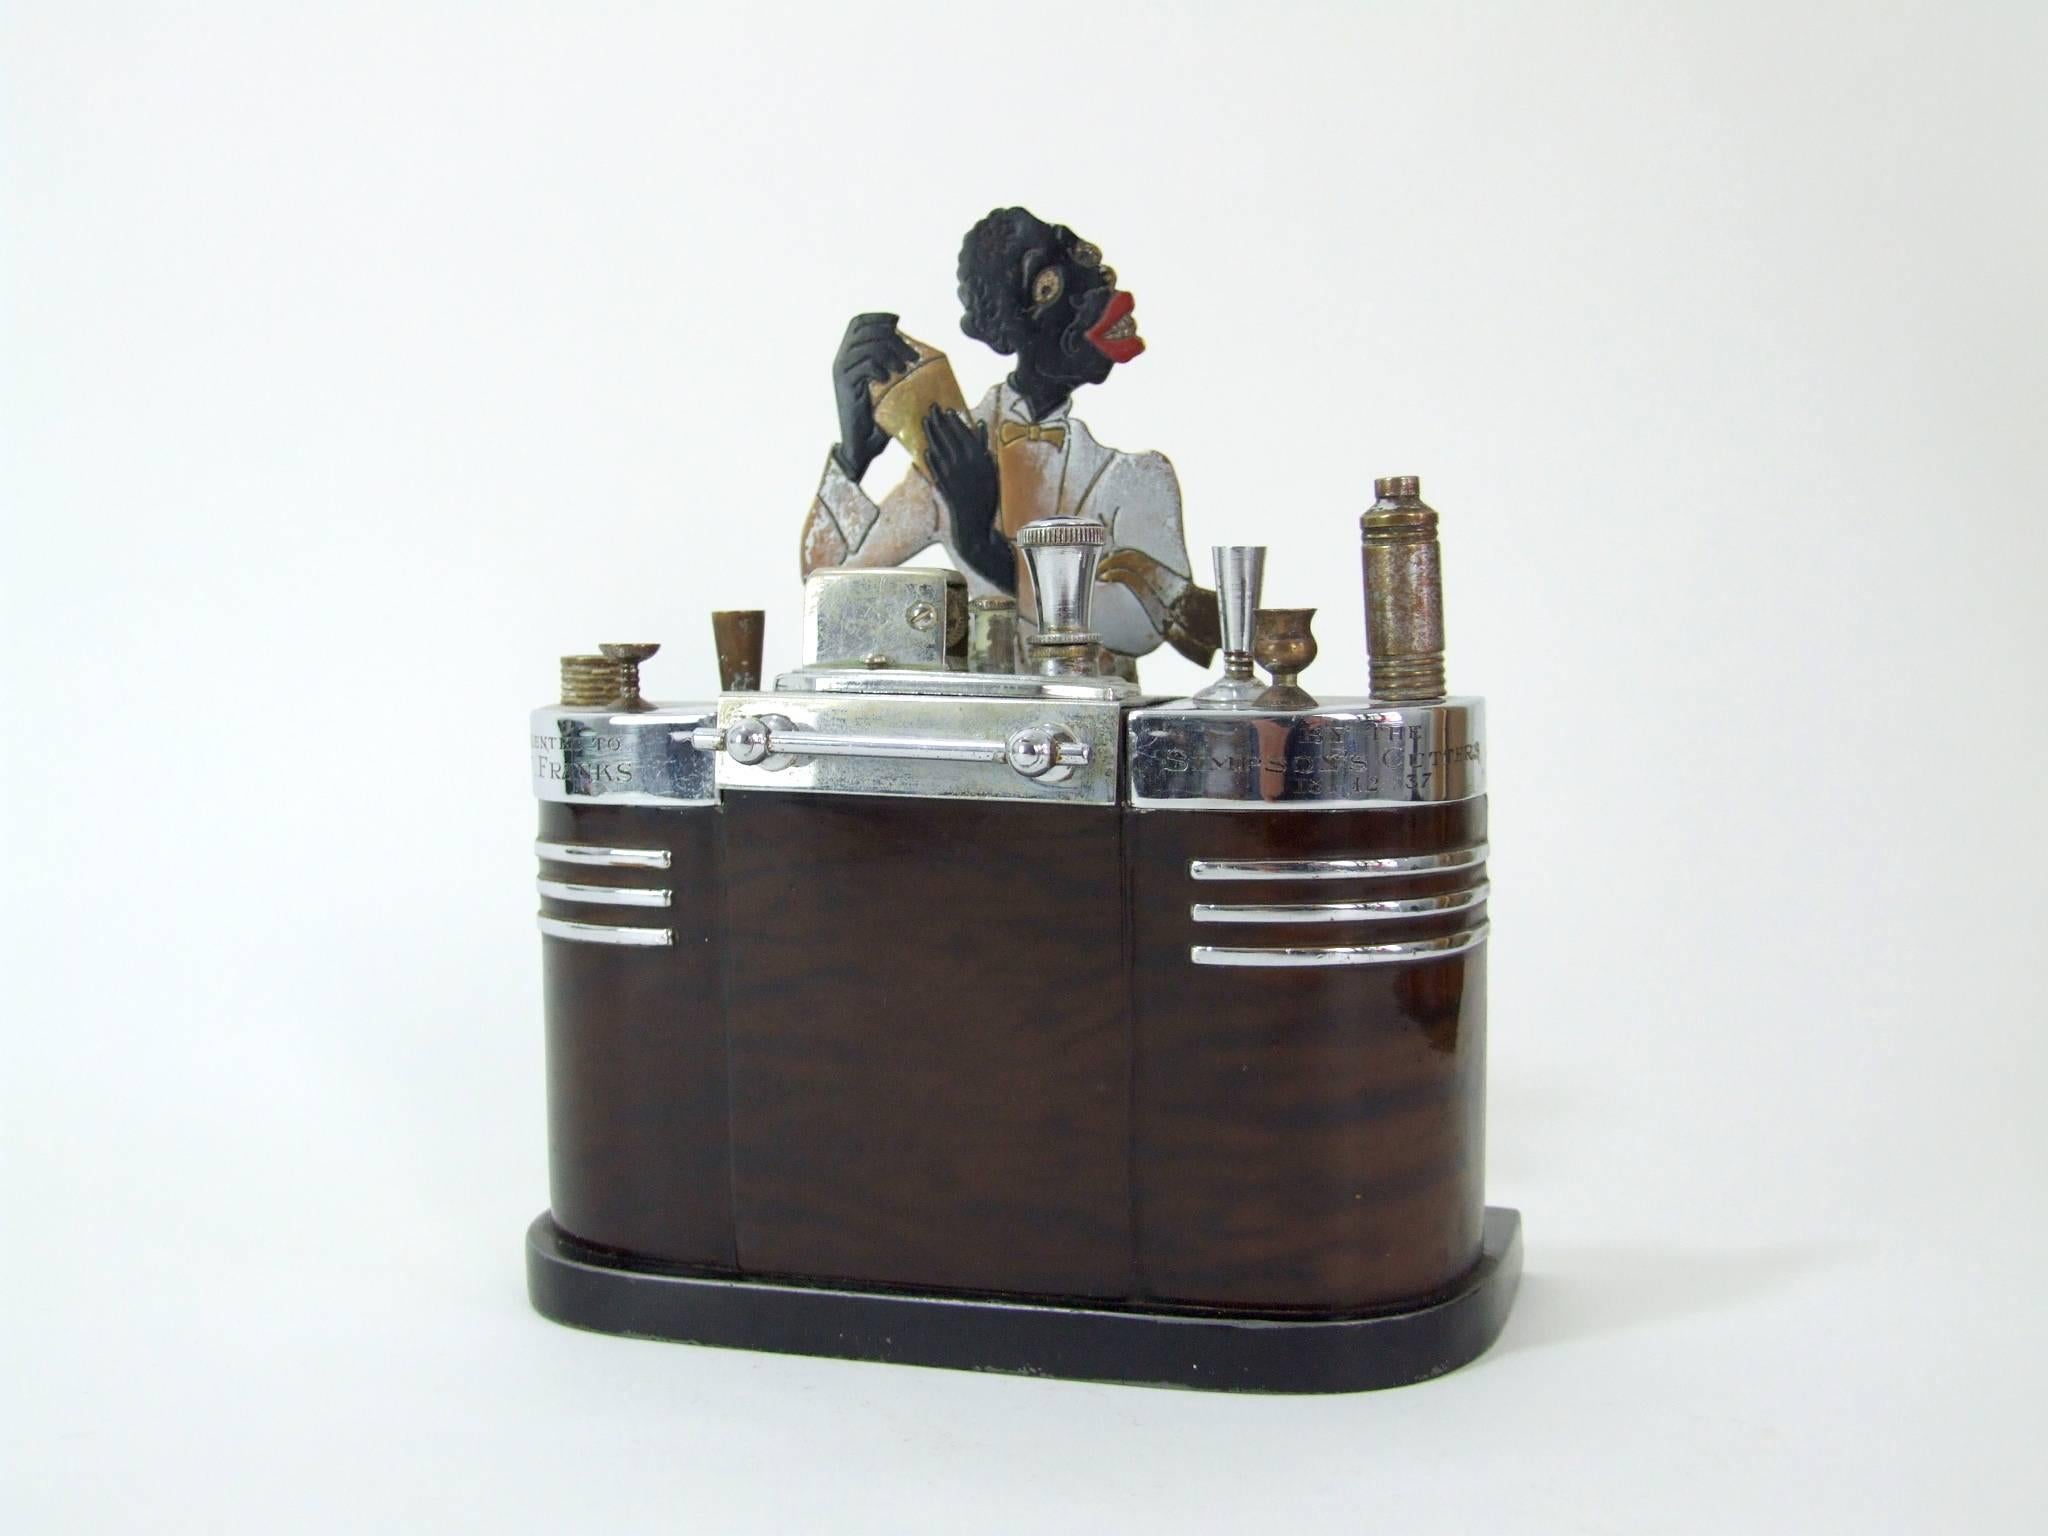 An original and now rare Ronson Touch Tip bartender lighter and cigarette box. Black patinated metal base, wood effect bar and chrome detailing. It bears a presentation inscription which is dated 1937. The lighter in the centre section has its